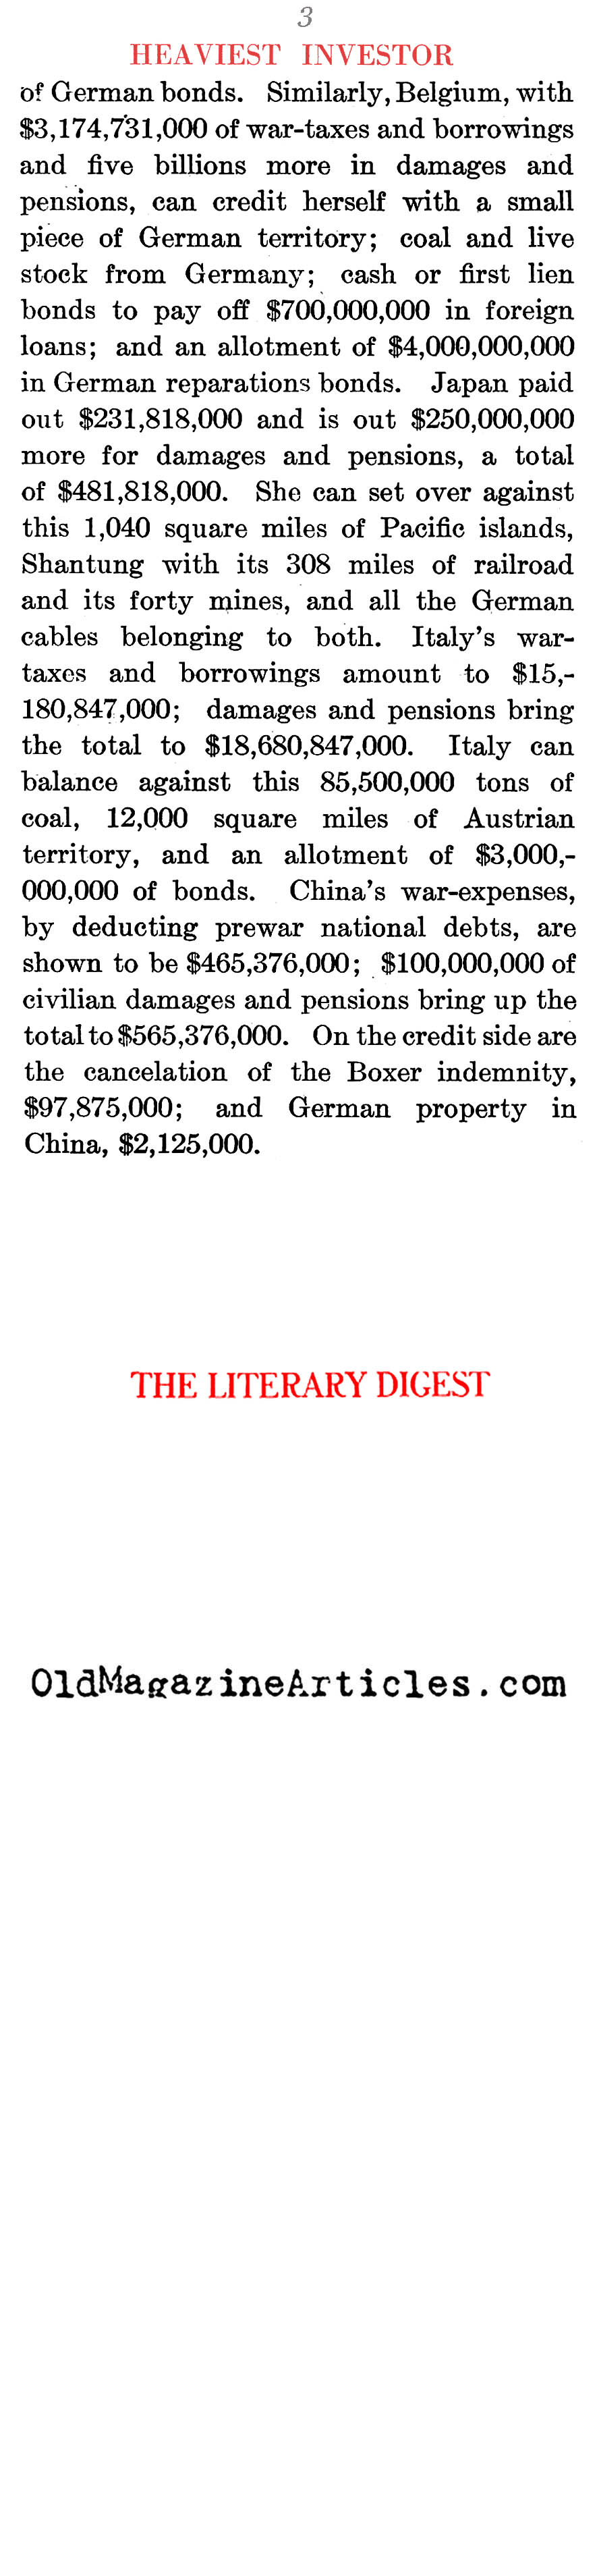 The Biggest Investor In The War (The Literary Digest, 1921)